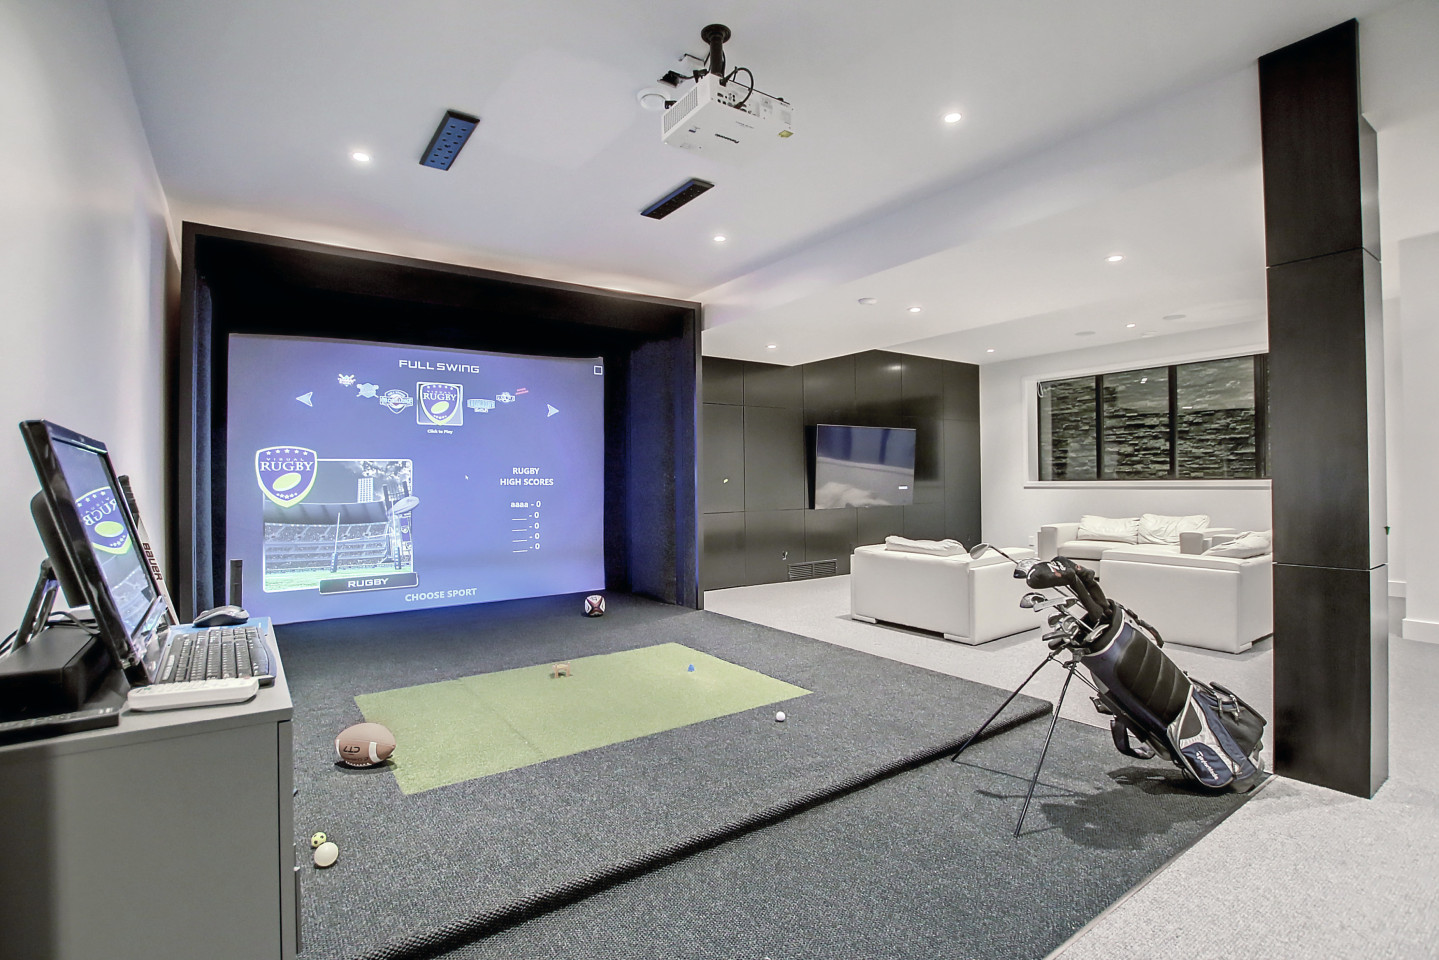 Why have a just a golf simulator when you can have a full sports simulator...soccer, hockey, football, rugby, dodgeball.....